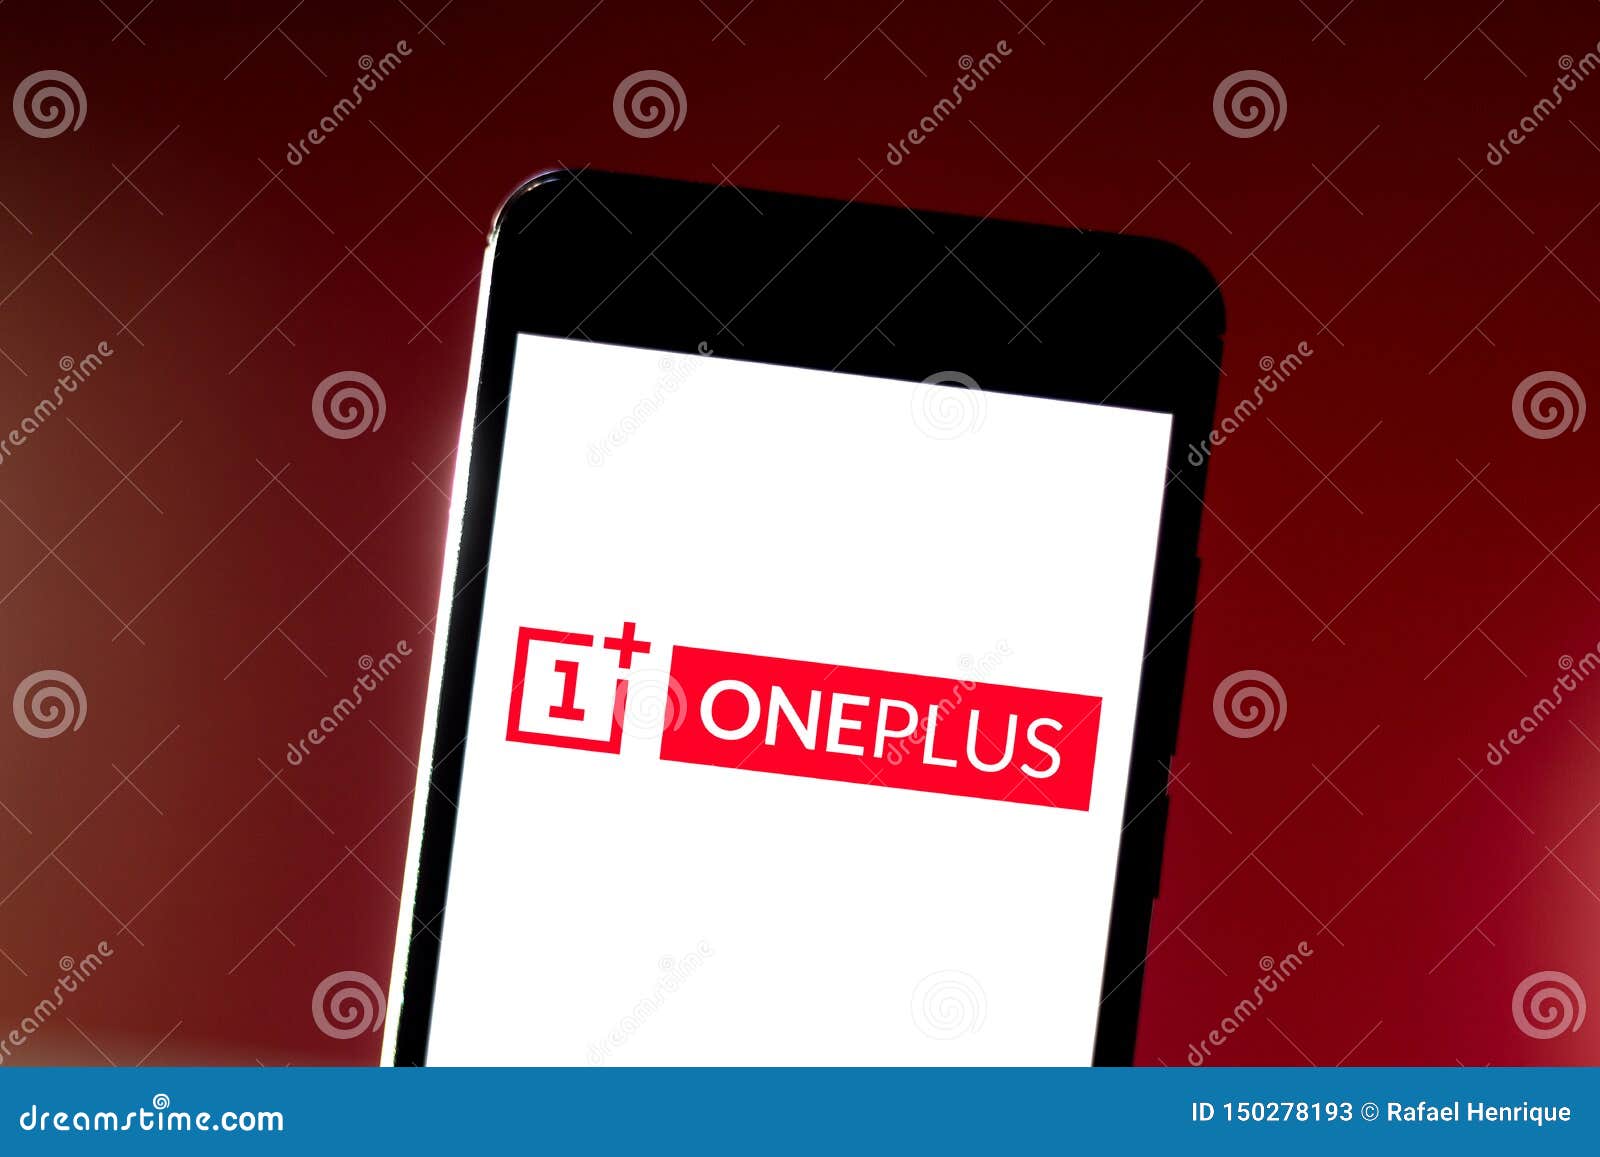 OnePlus 8T May Not Be The Only OnePlus Phone To Launch In October